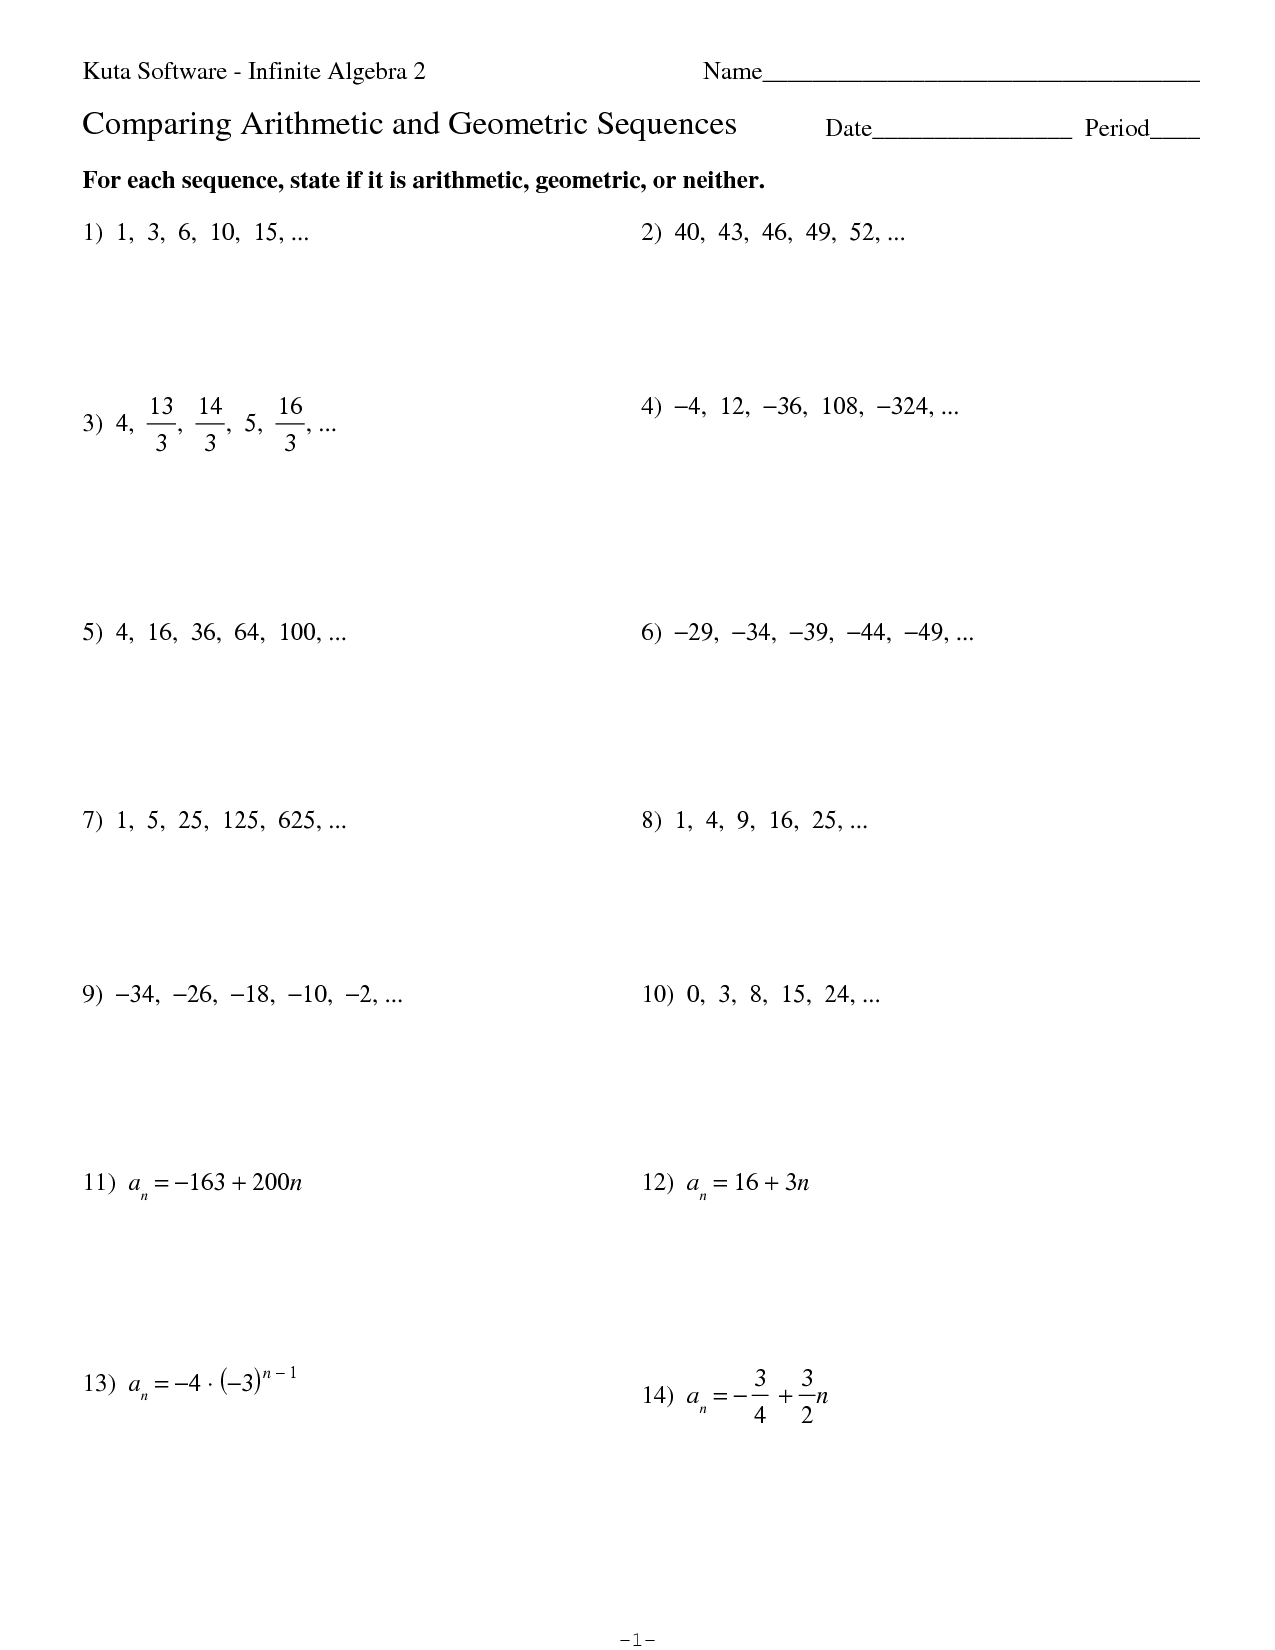 solution-comparing-arithmetic-and-geometric-sequences-studypool-math-worksheet-answers